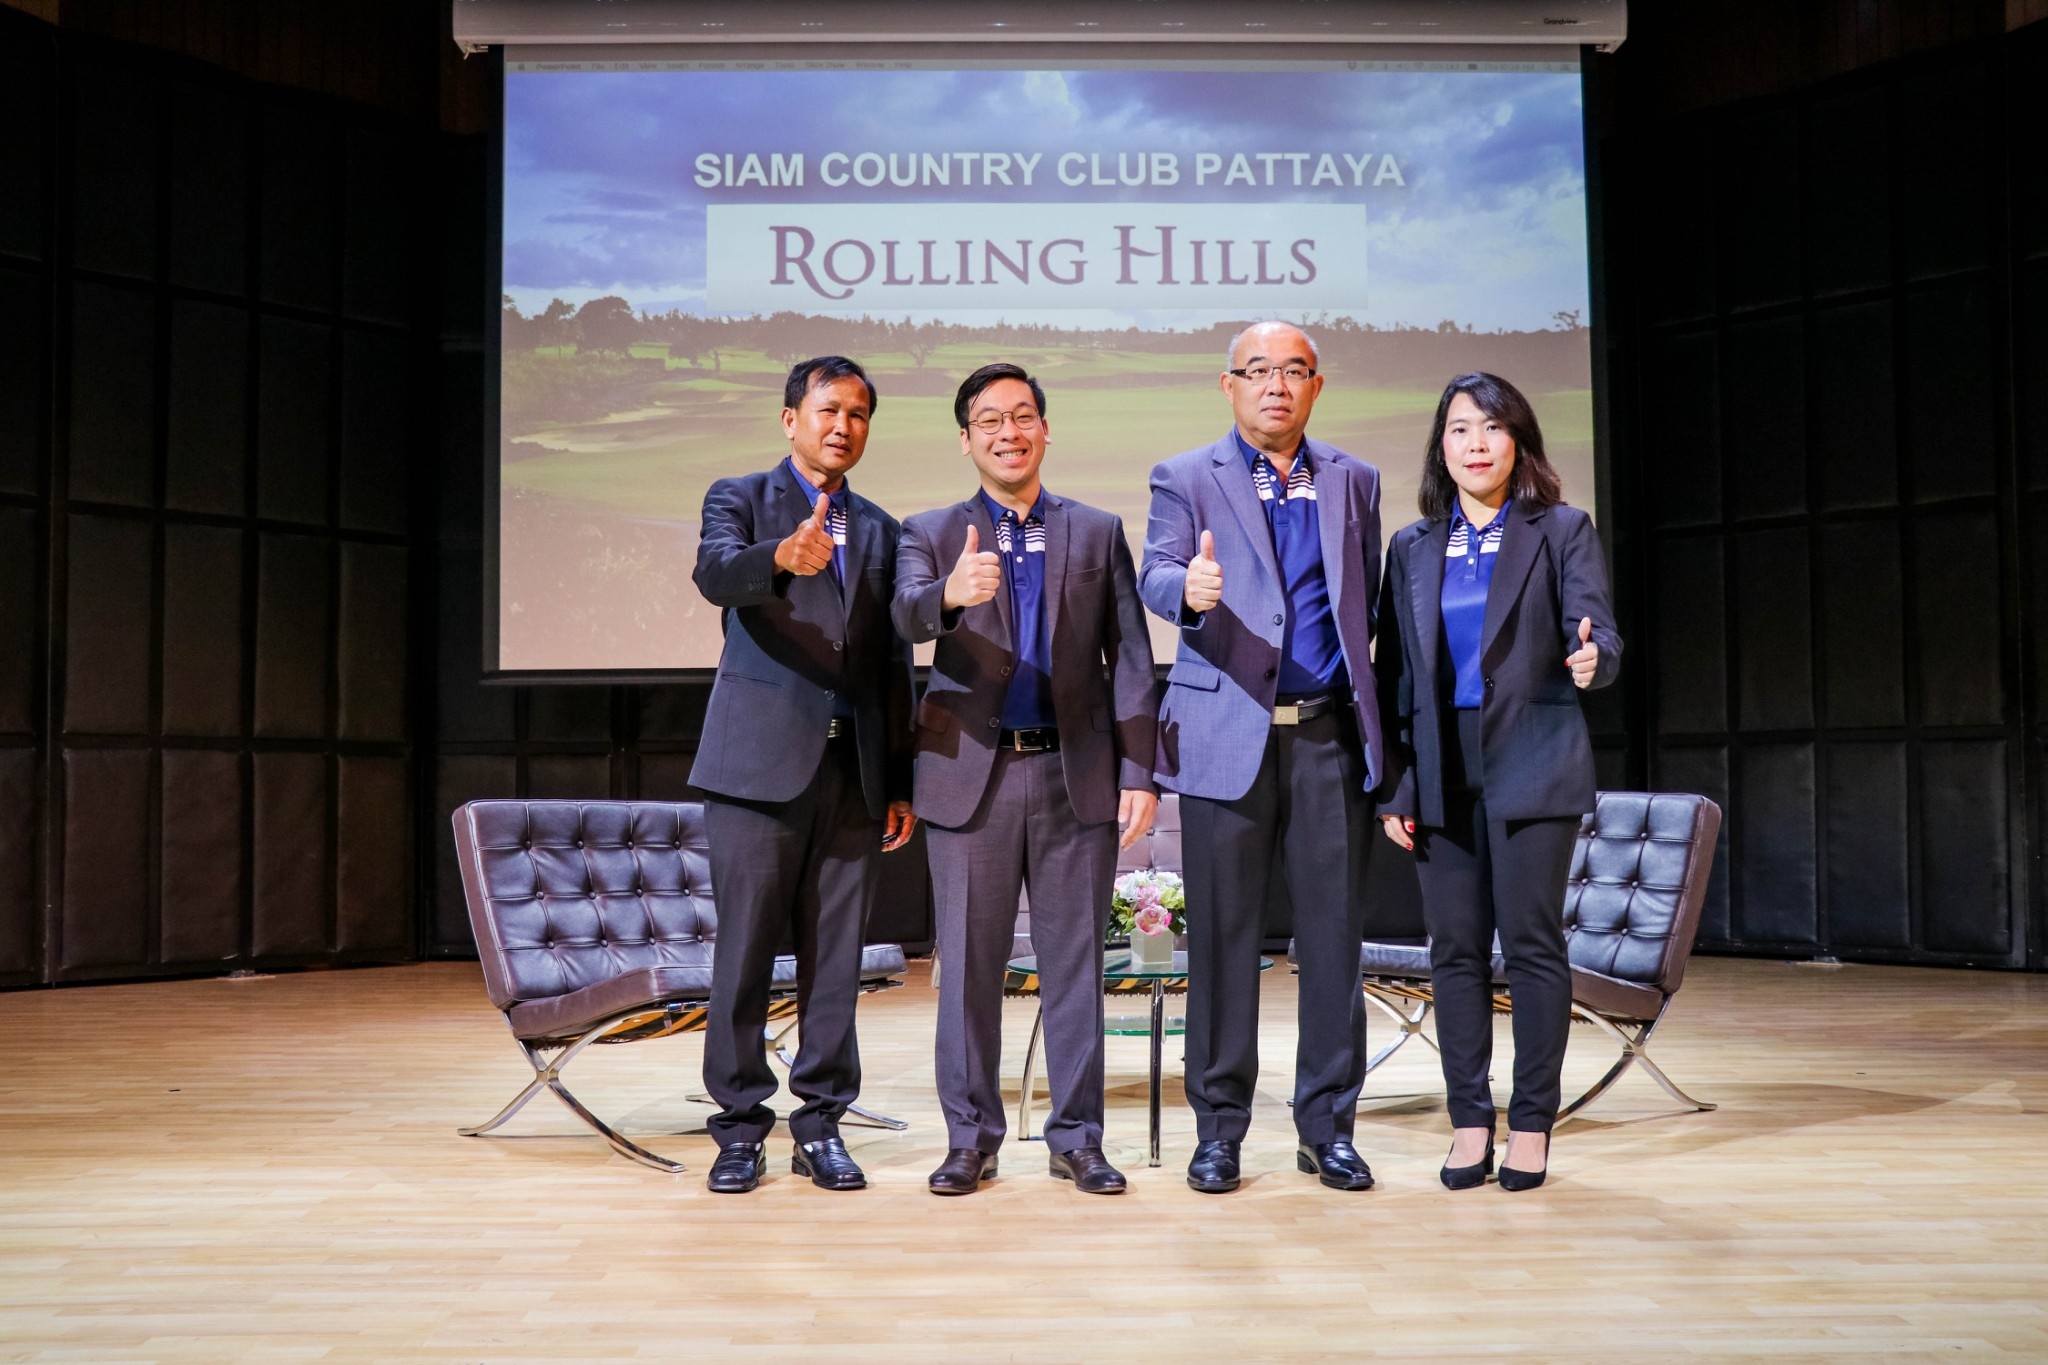 Siam Country Club : Rolling Hills will open in January 2020